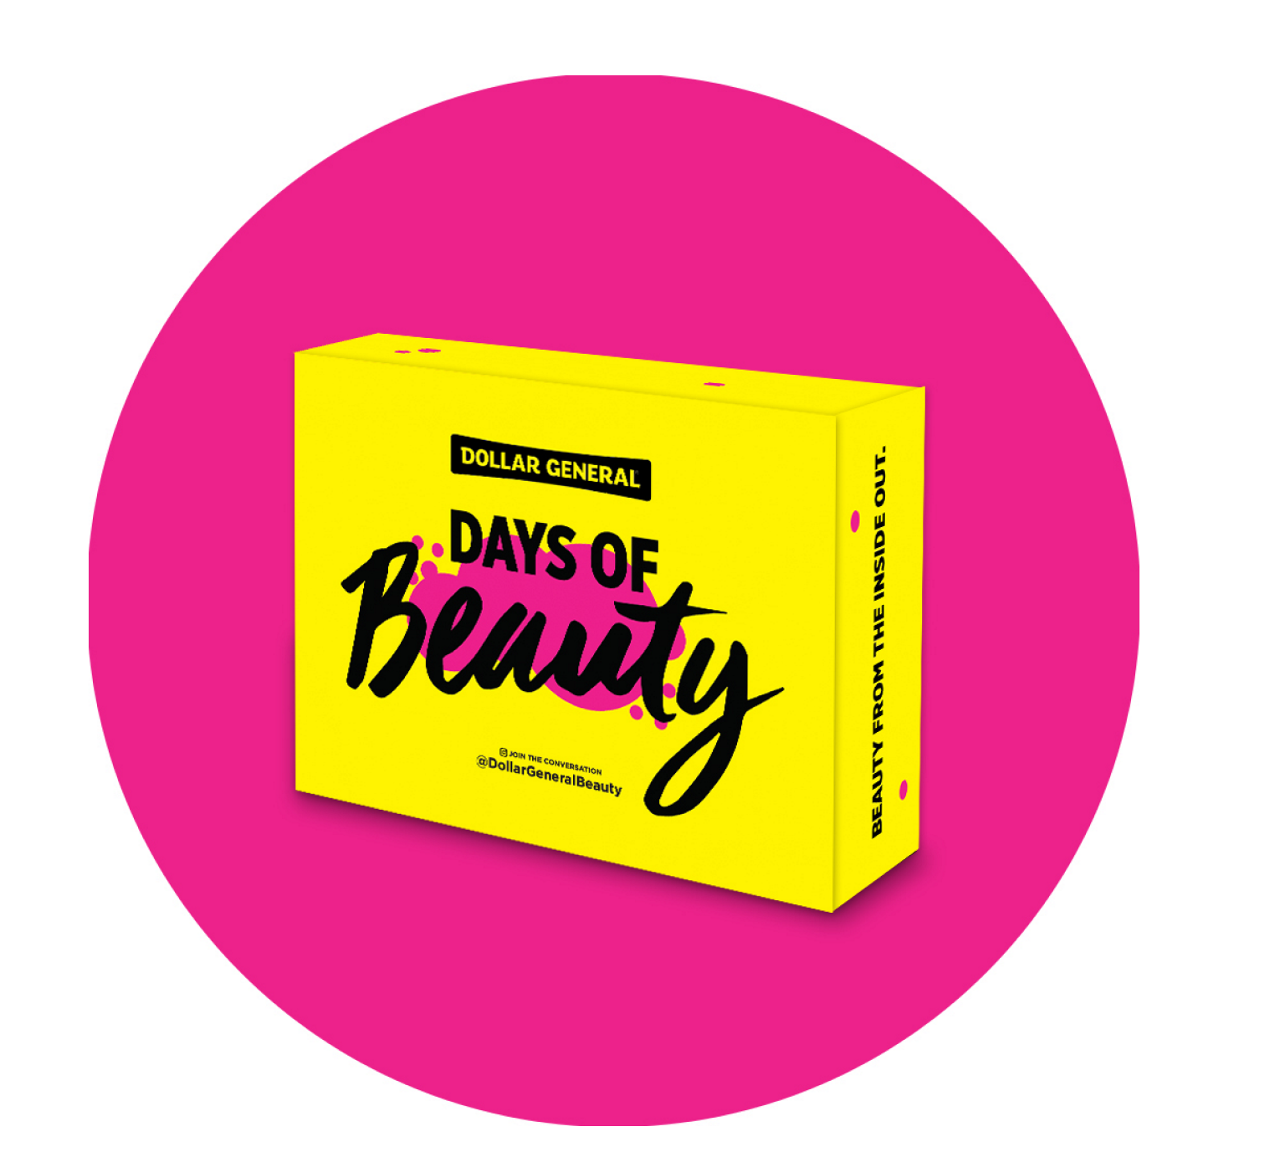 Days of Beauty giveaway boxes